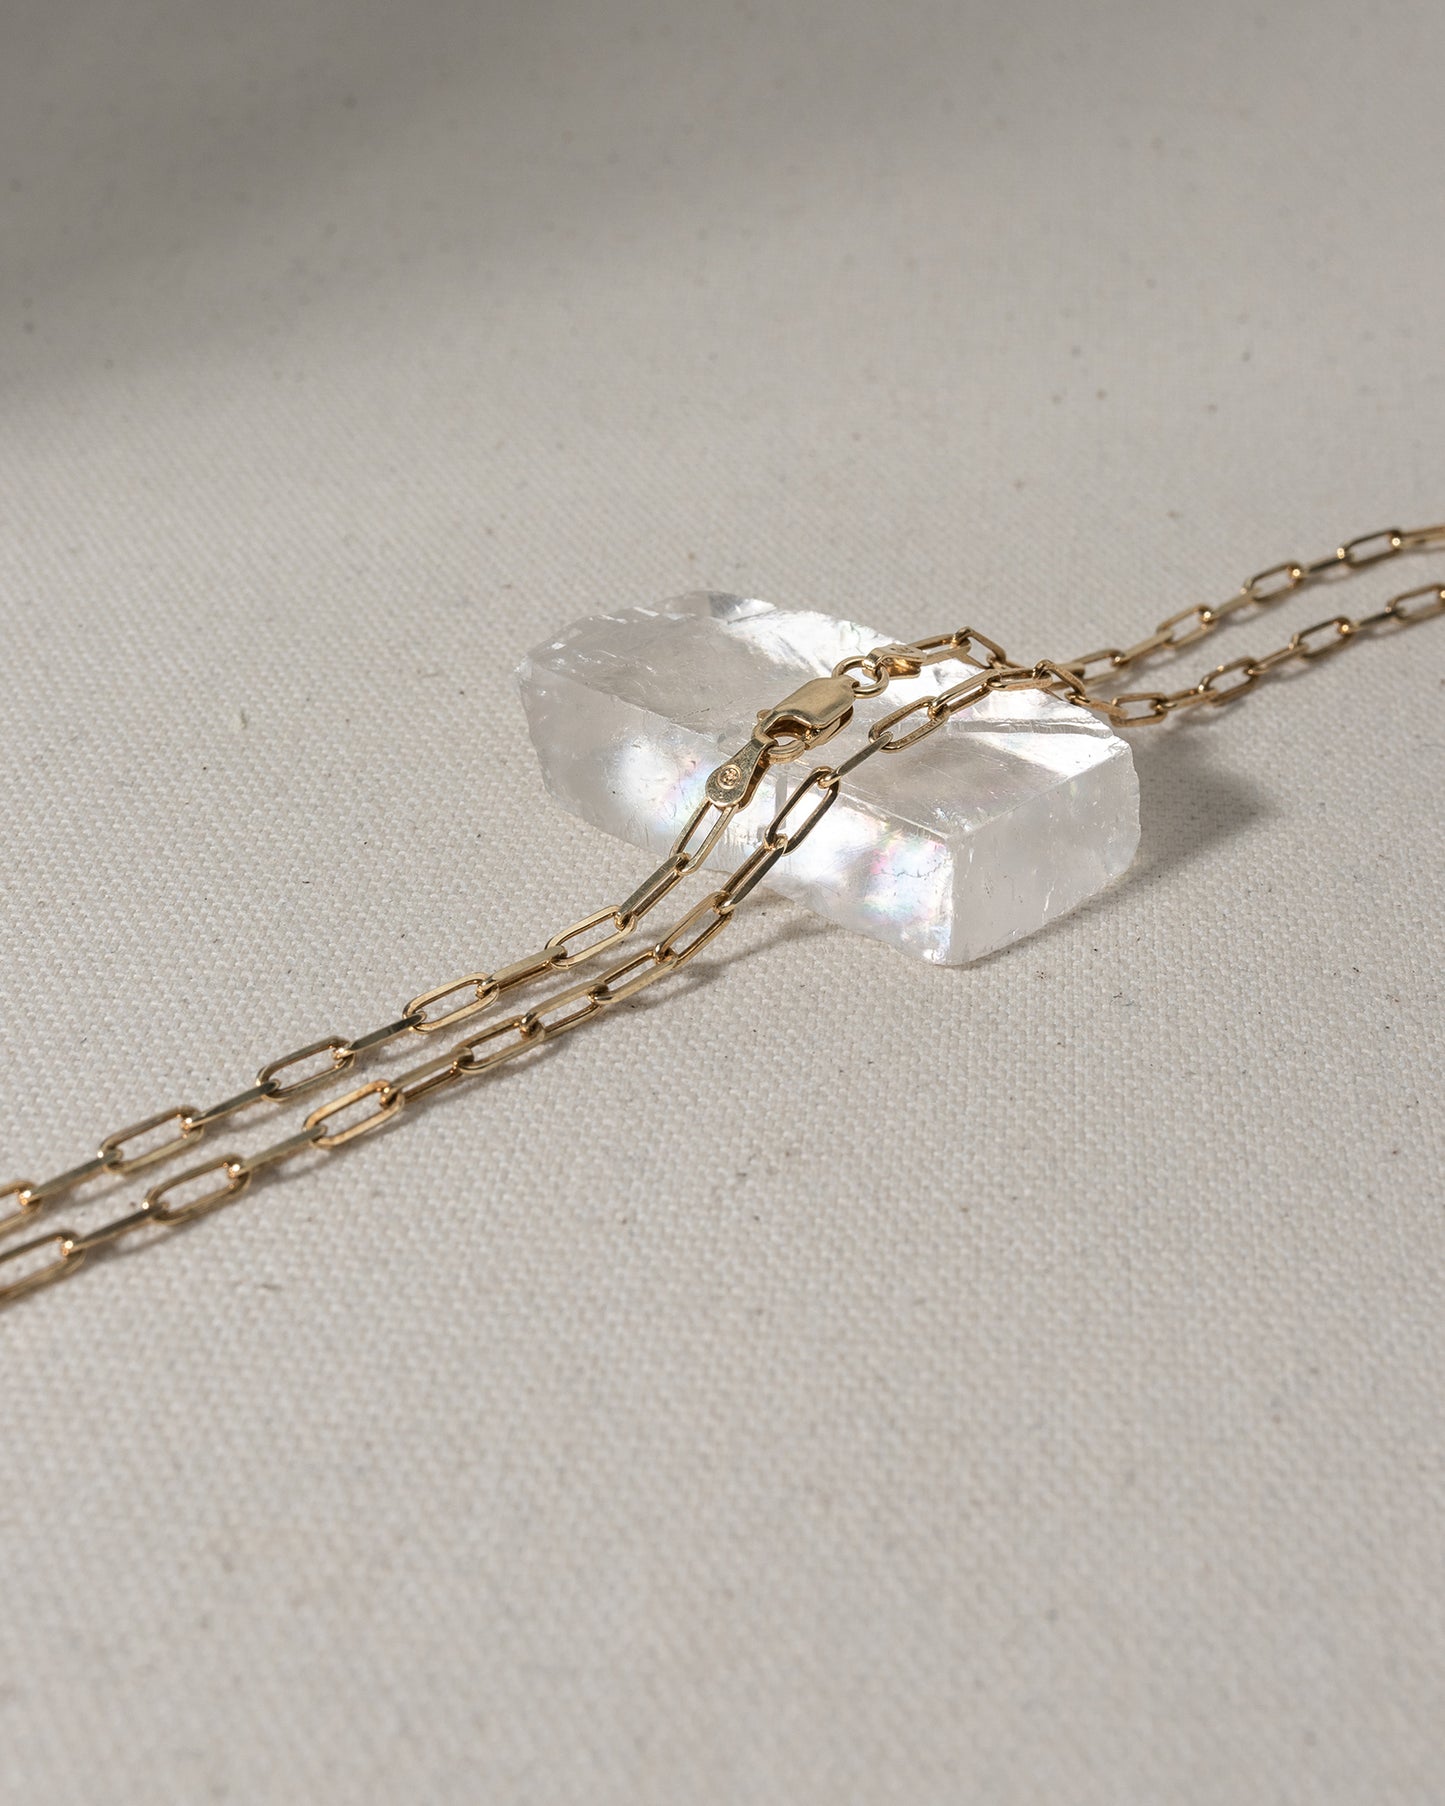 Gold chain with large oval links laying on glass piece